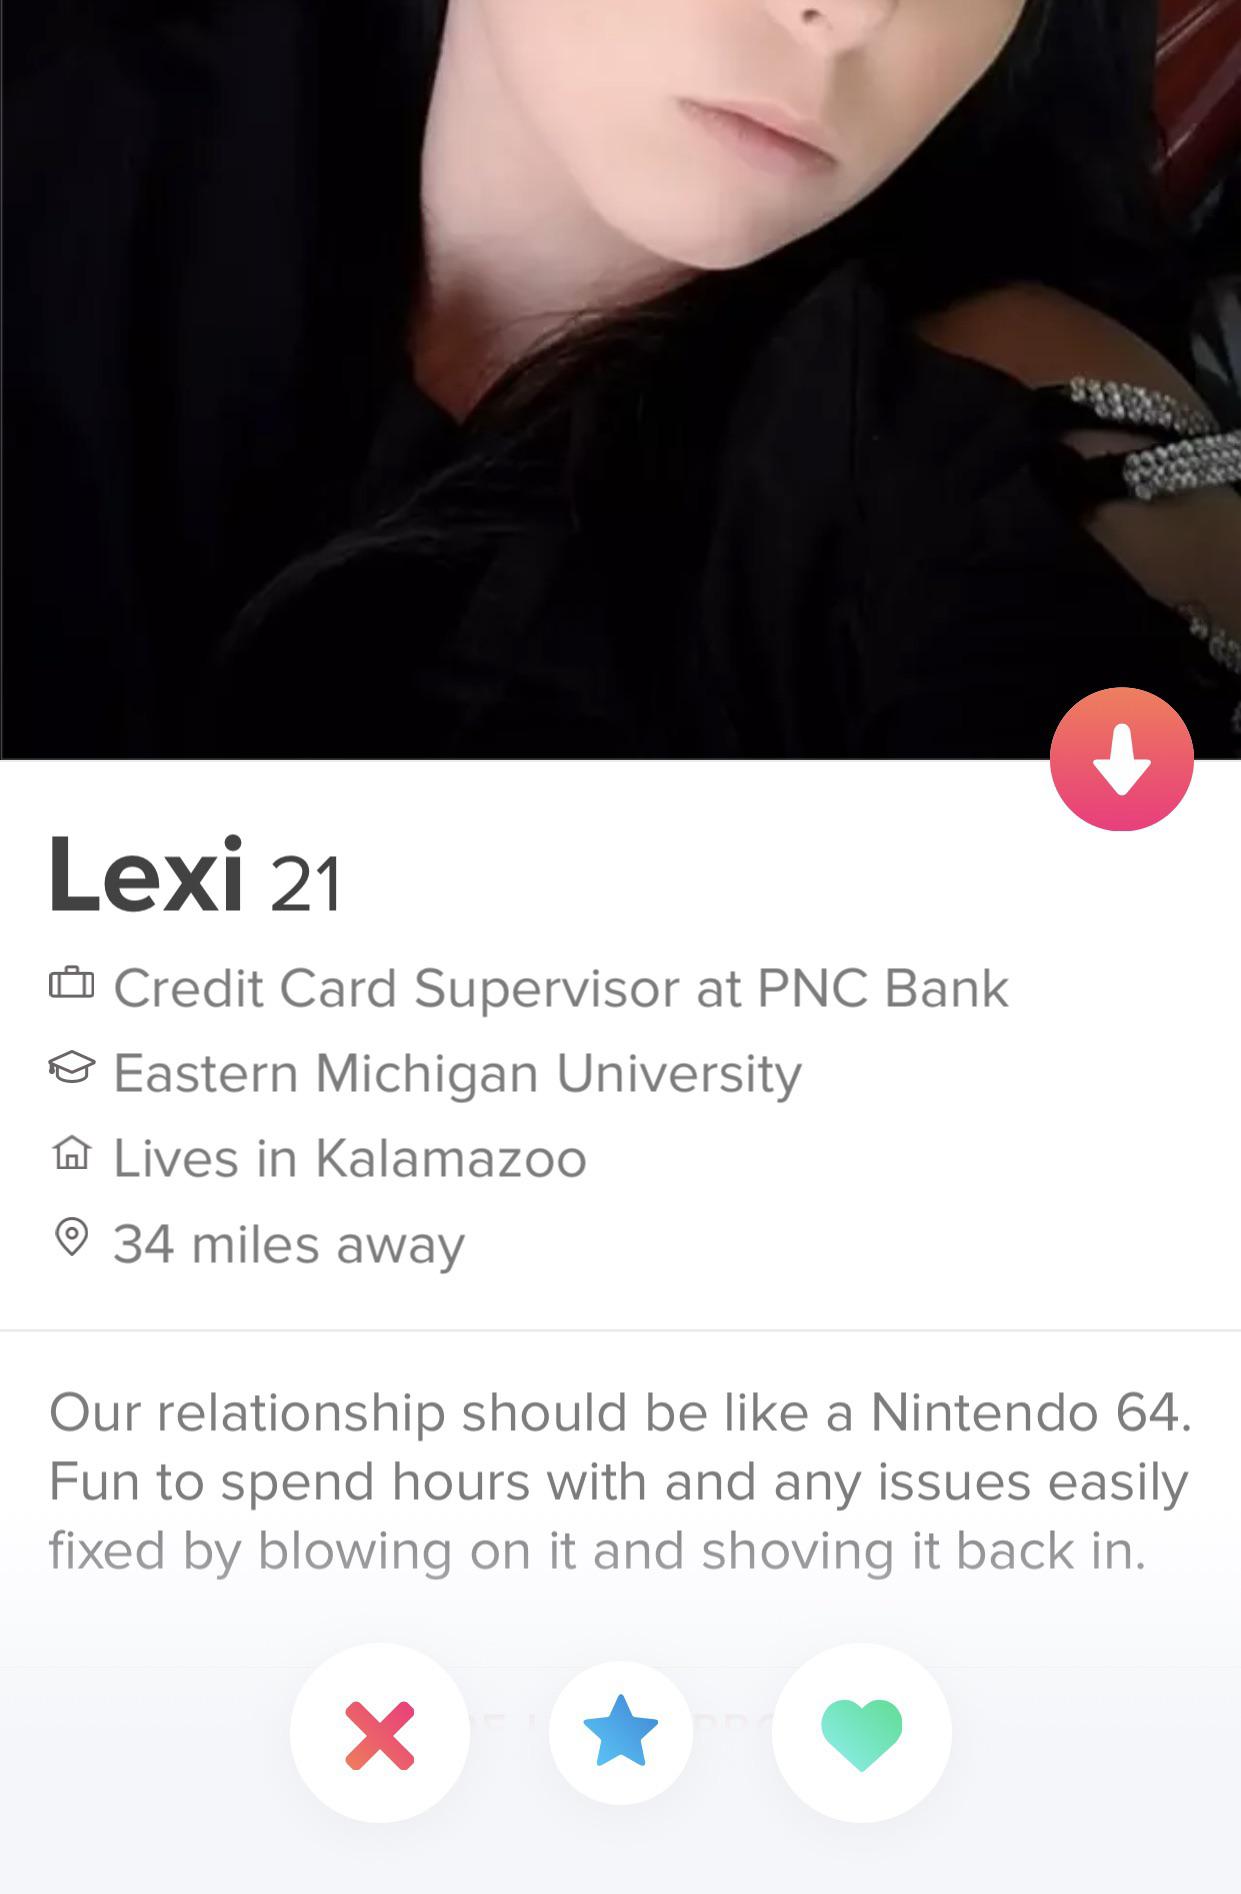 tinder - scranton white pages - Lexi 21 Credit Card Supervisor at Pnc Bank @ Eastern Michigan University A Lives in Kalamazoo 34 miles away Our relationship should be a Nintendo 64. Fun to spend hours with and any issues easily fixed by blowing on it and 